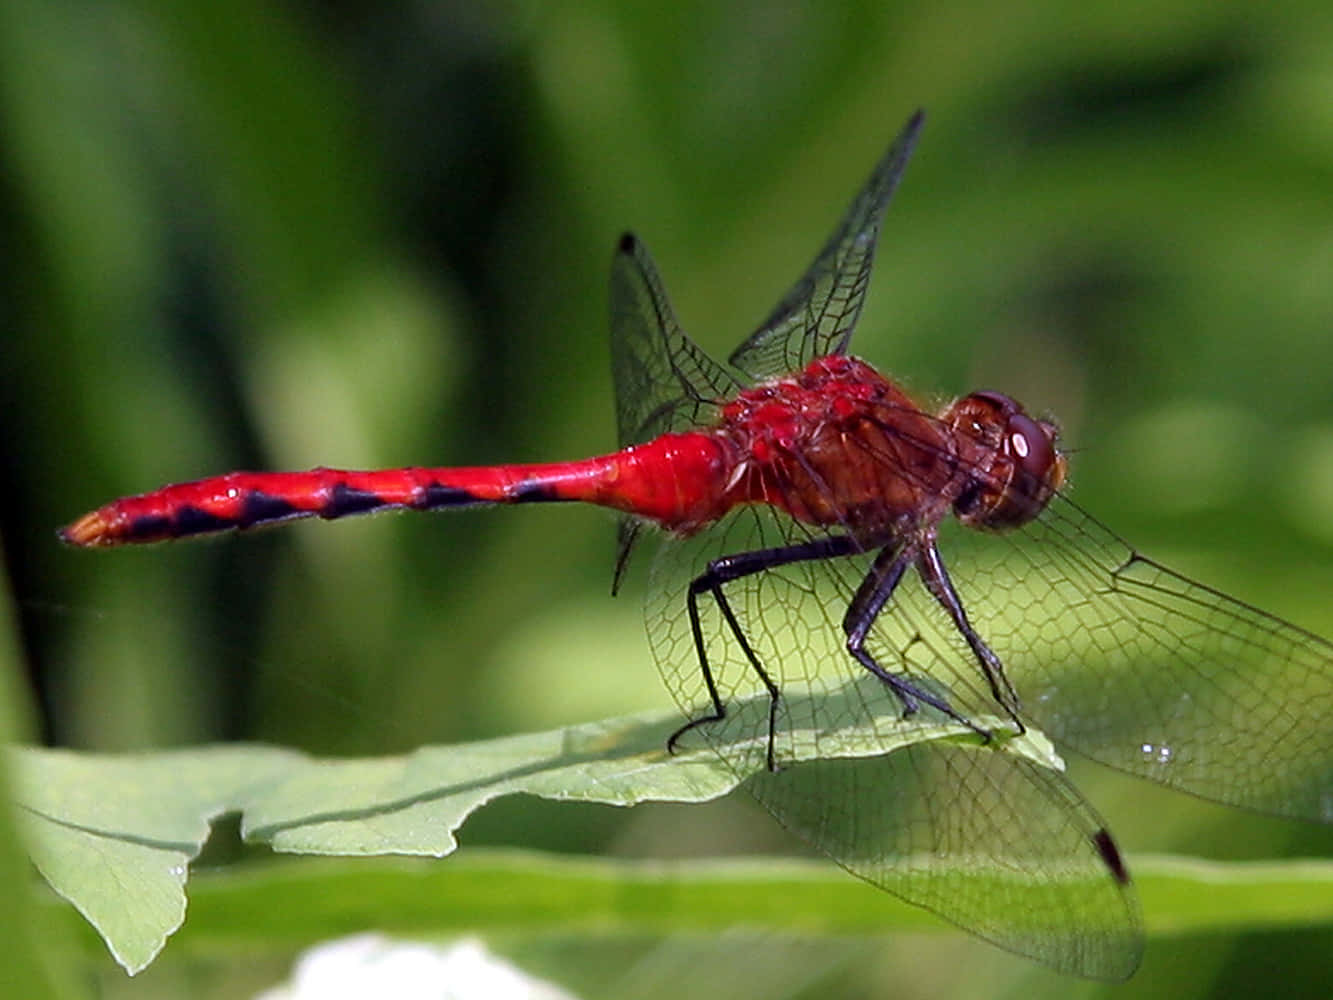 Stunning Red Dragonfly Perched on a Leaf Wallpaper